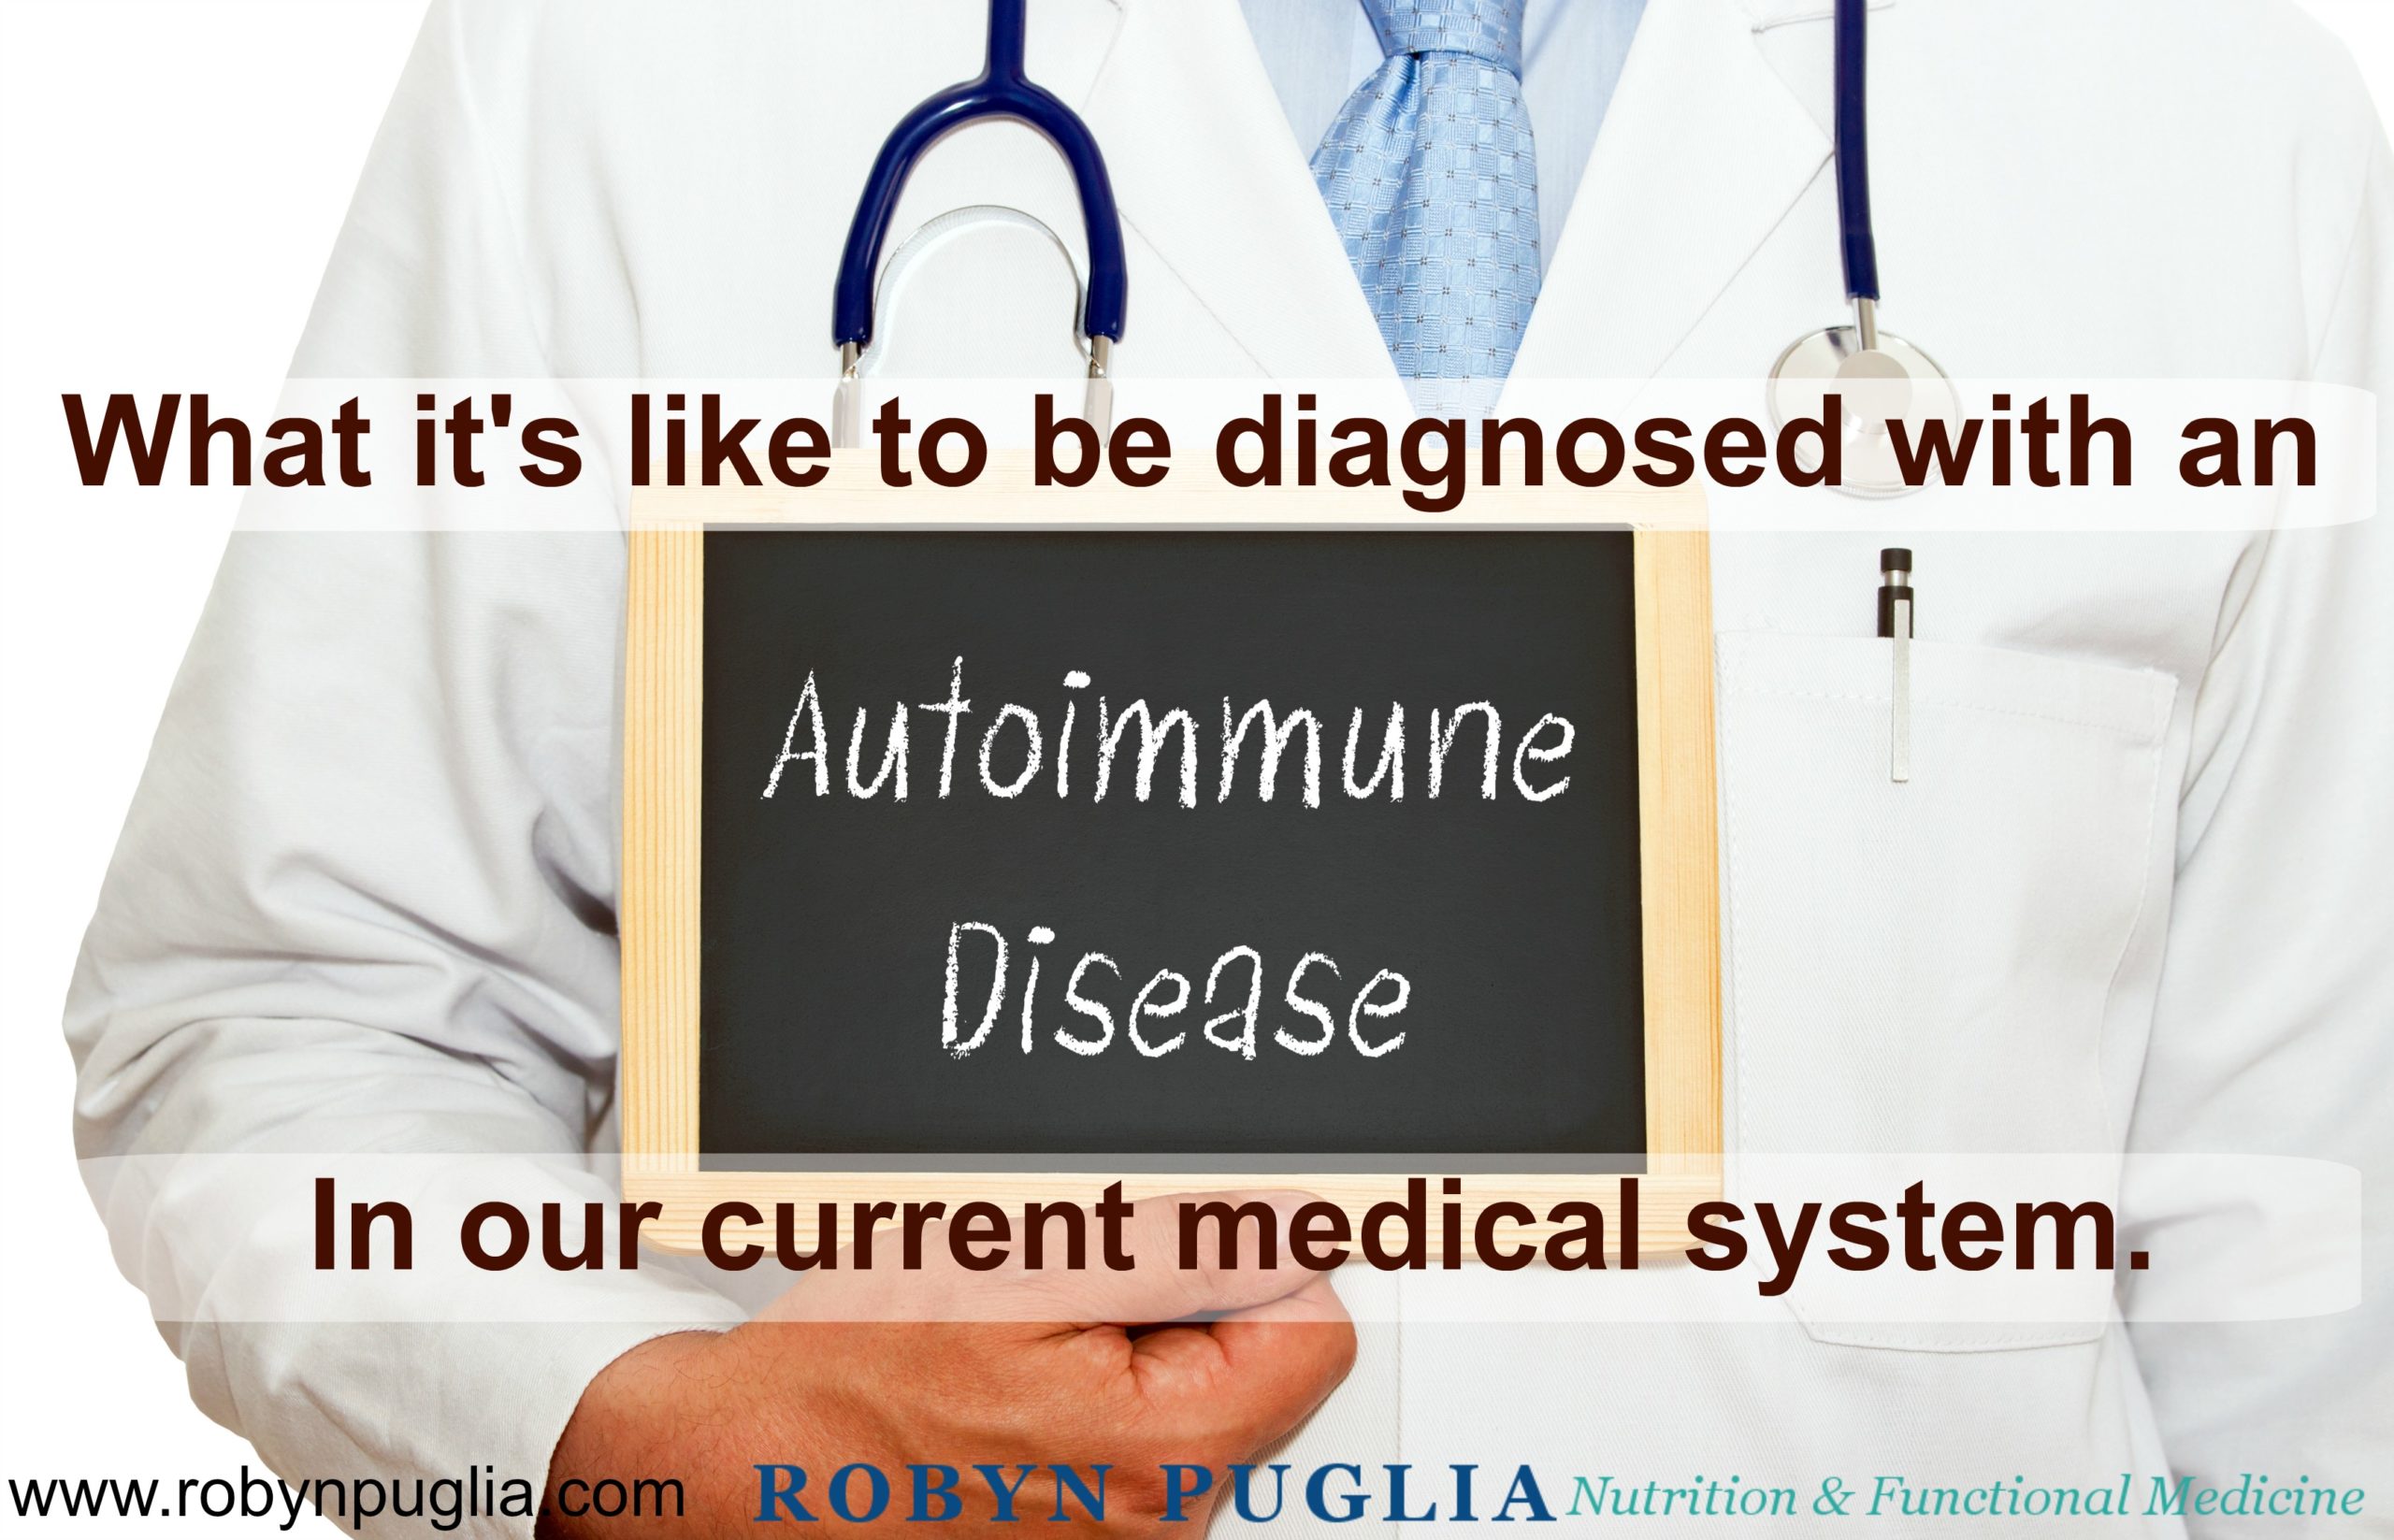 What it’s like to be diagnosed with an Autoimmune Disease in our Current Medical System.